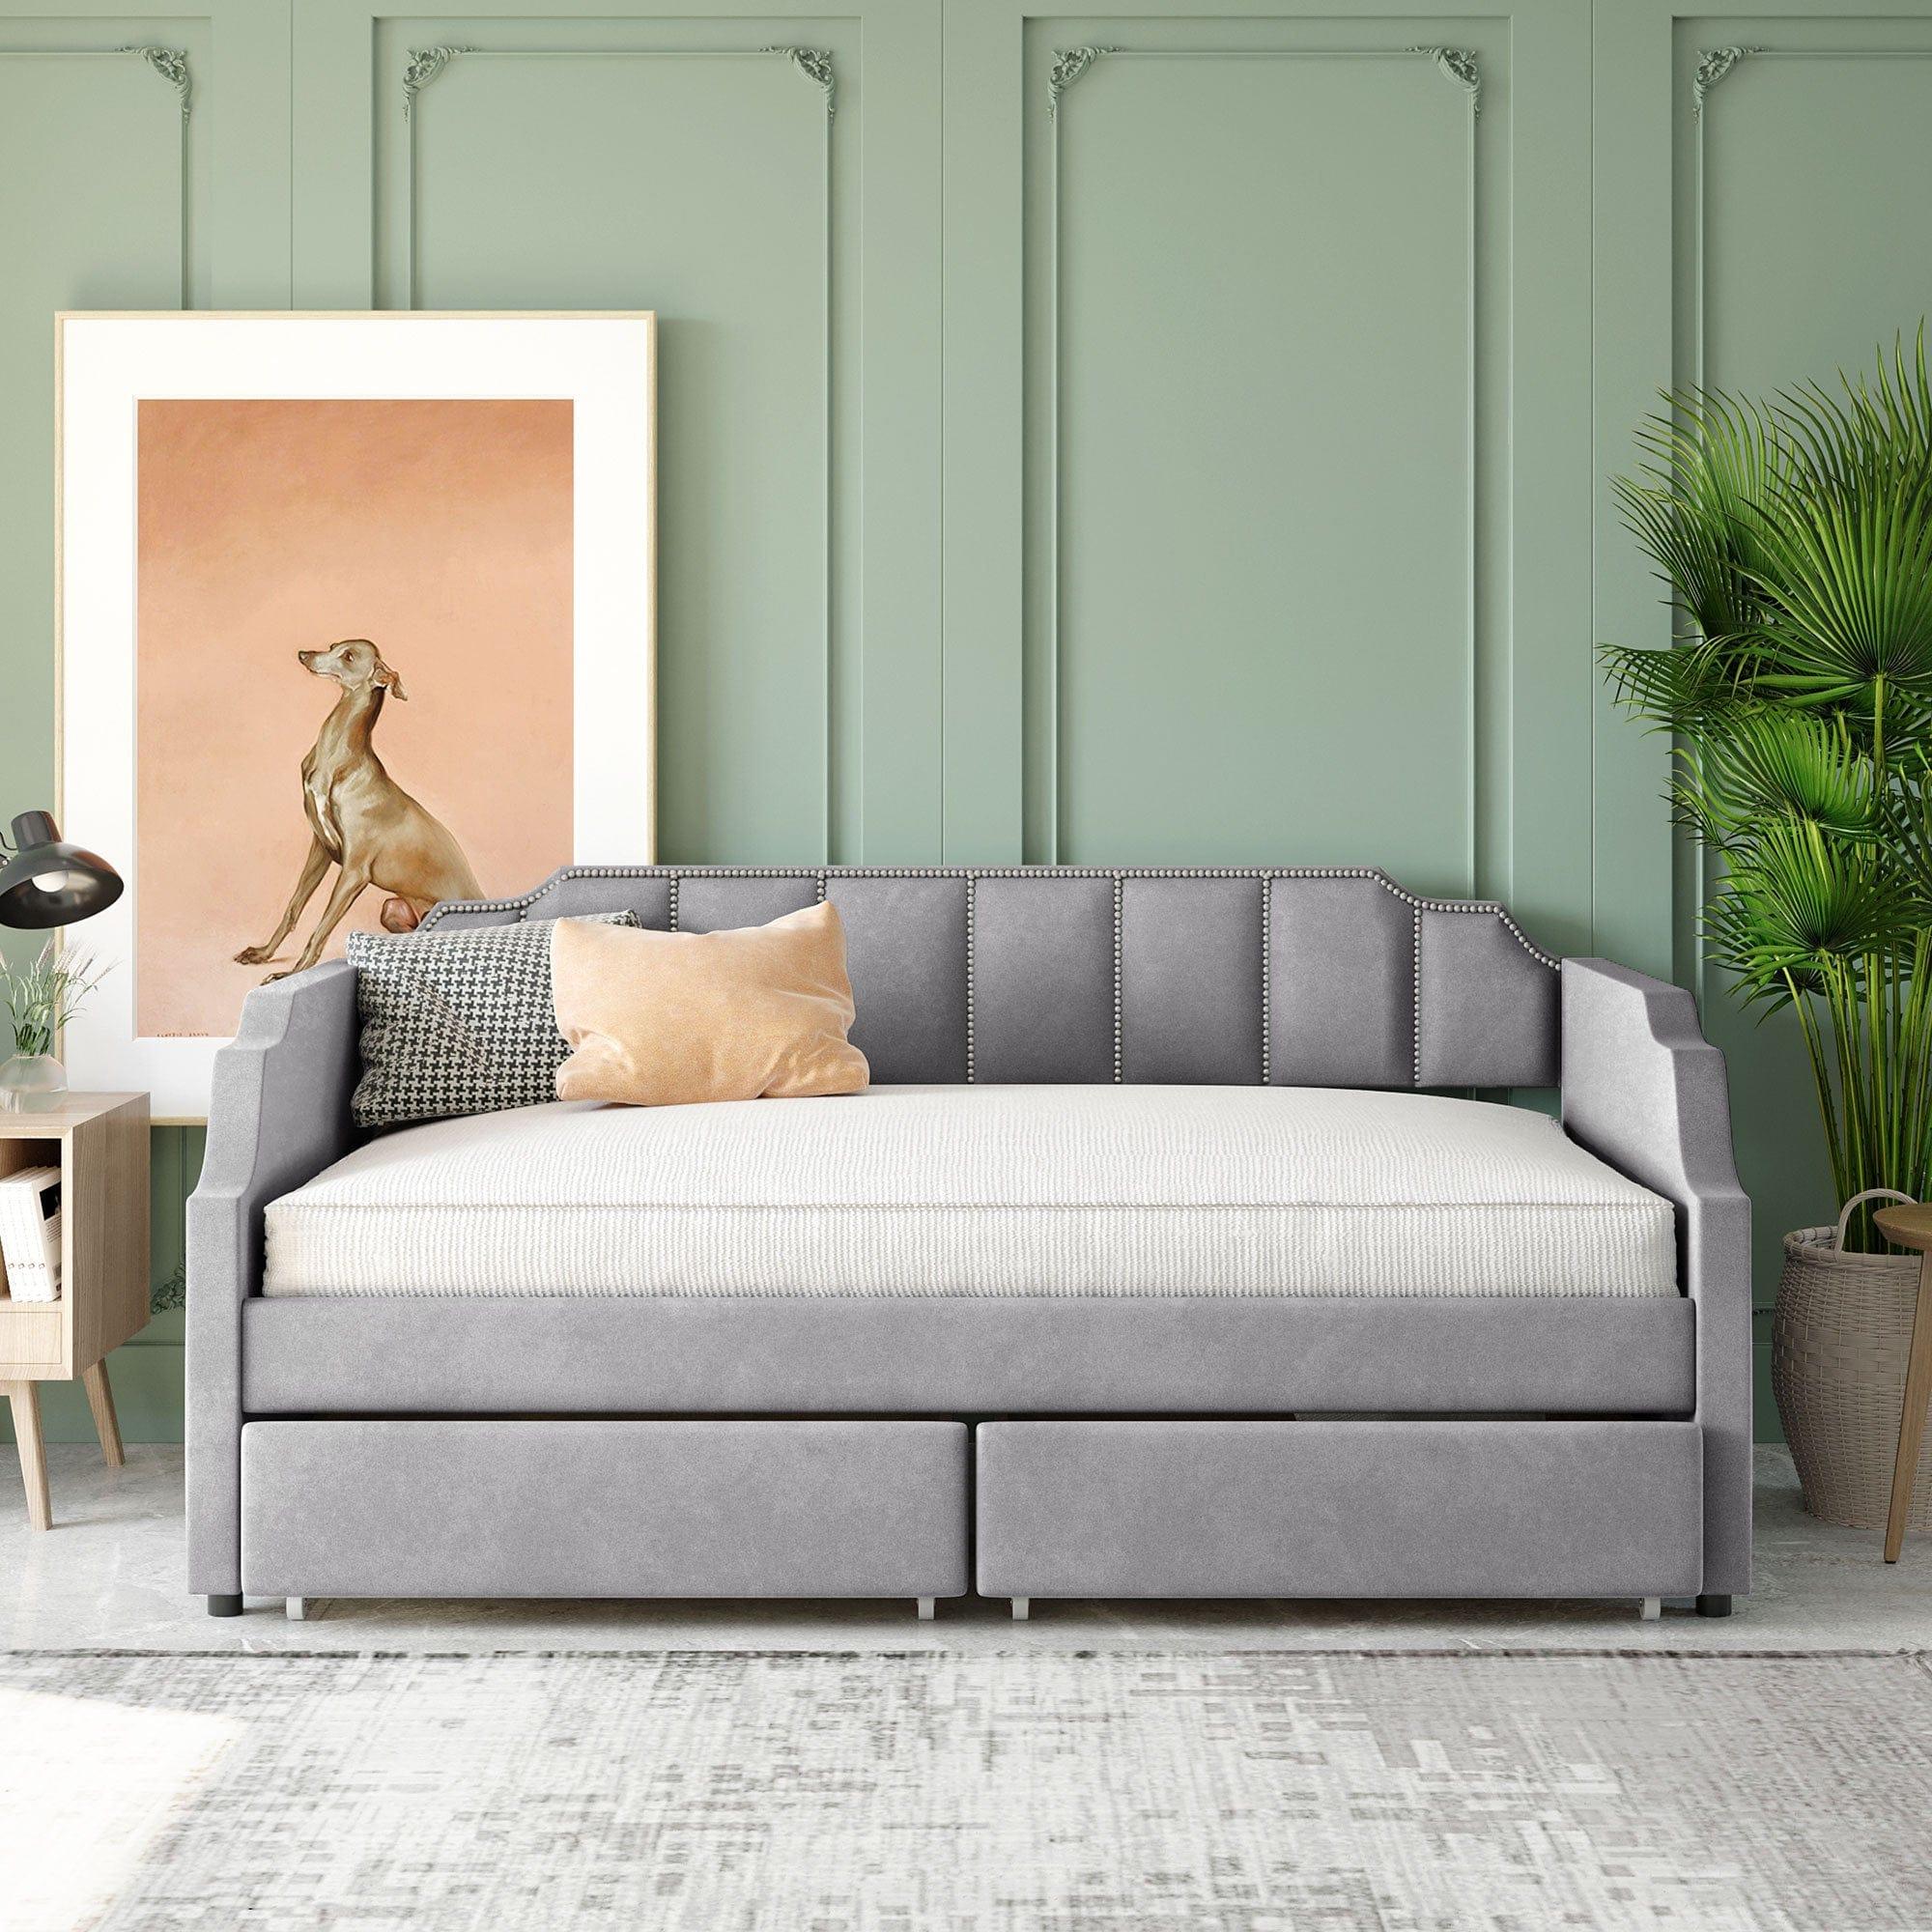 Shop Twin Size Upholstered daybed with Drawers, Wood Slat Support, Gray Mademoiselle Home Decor